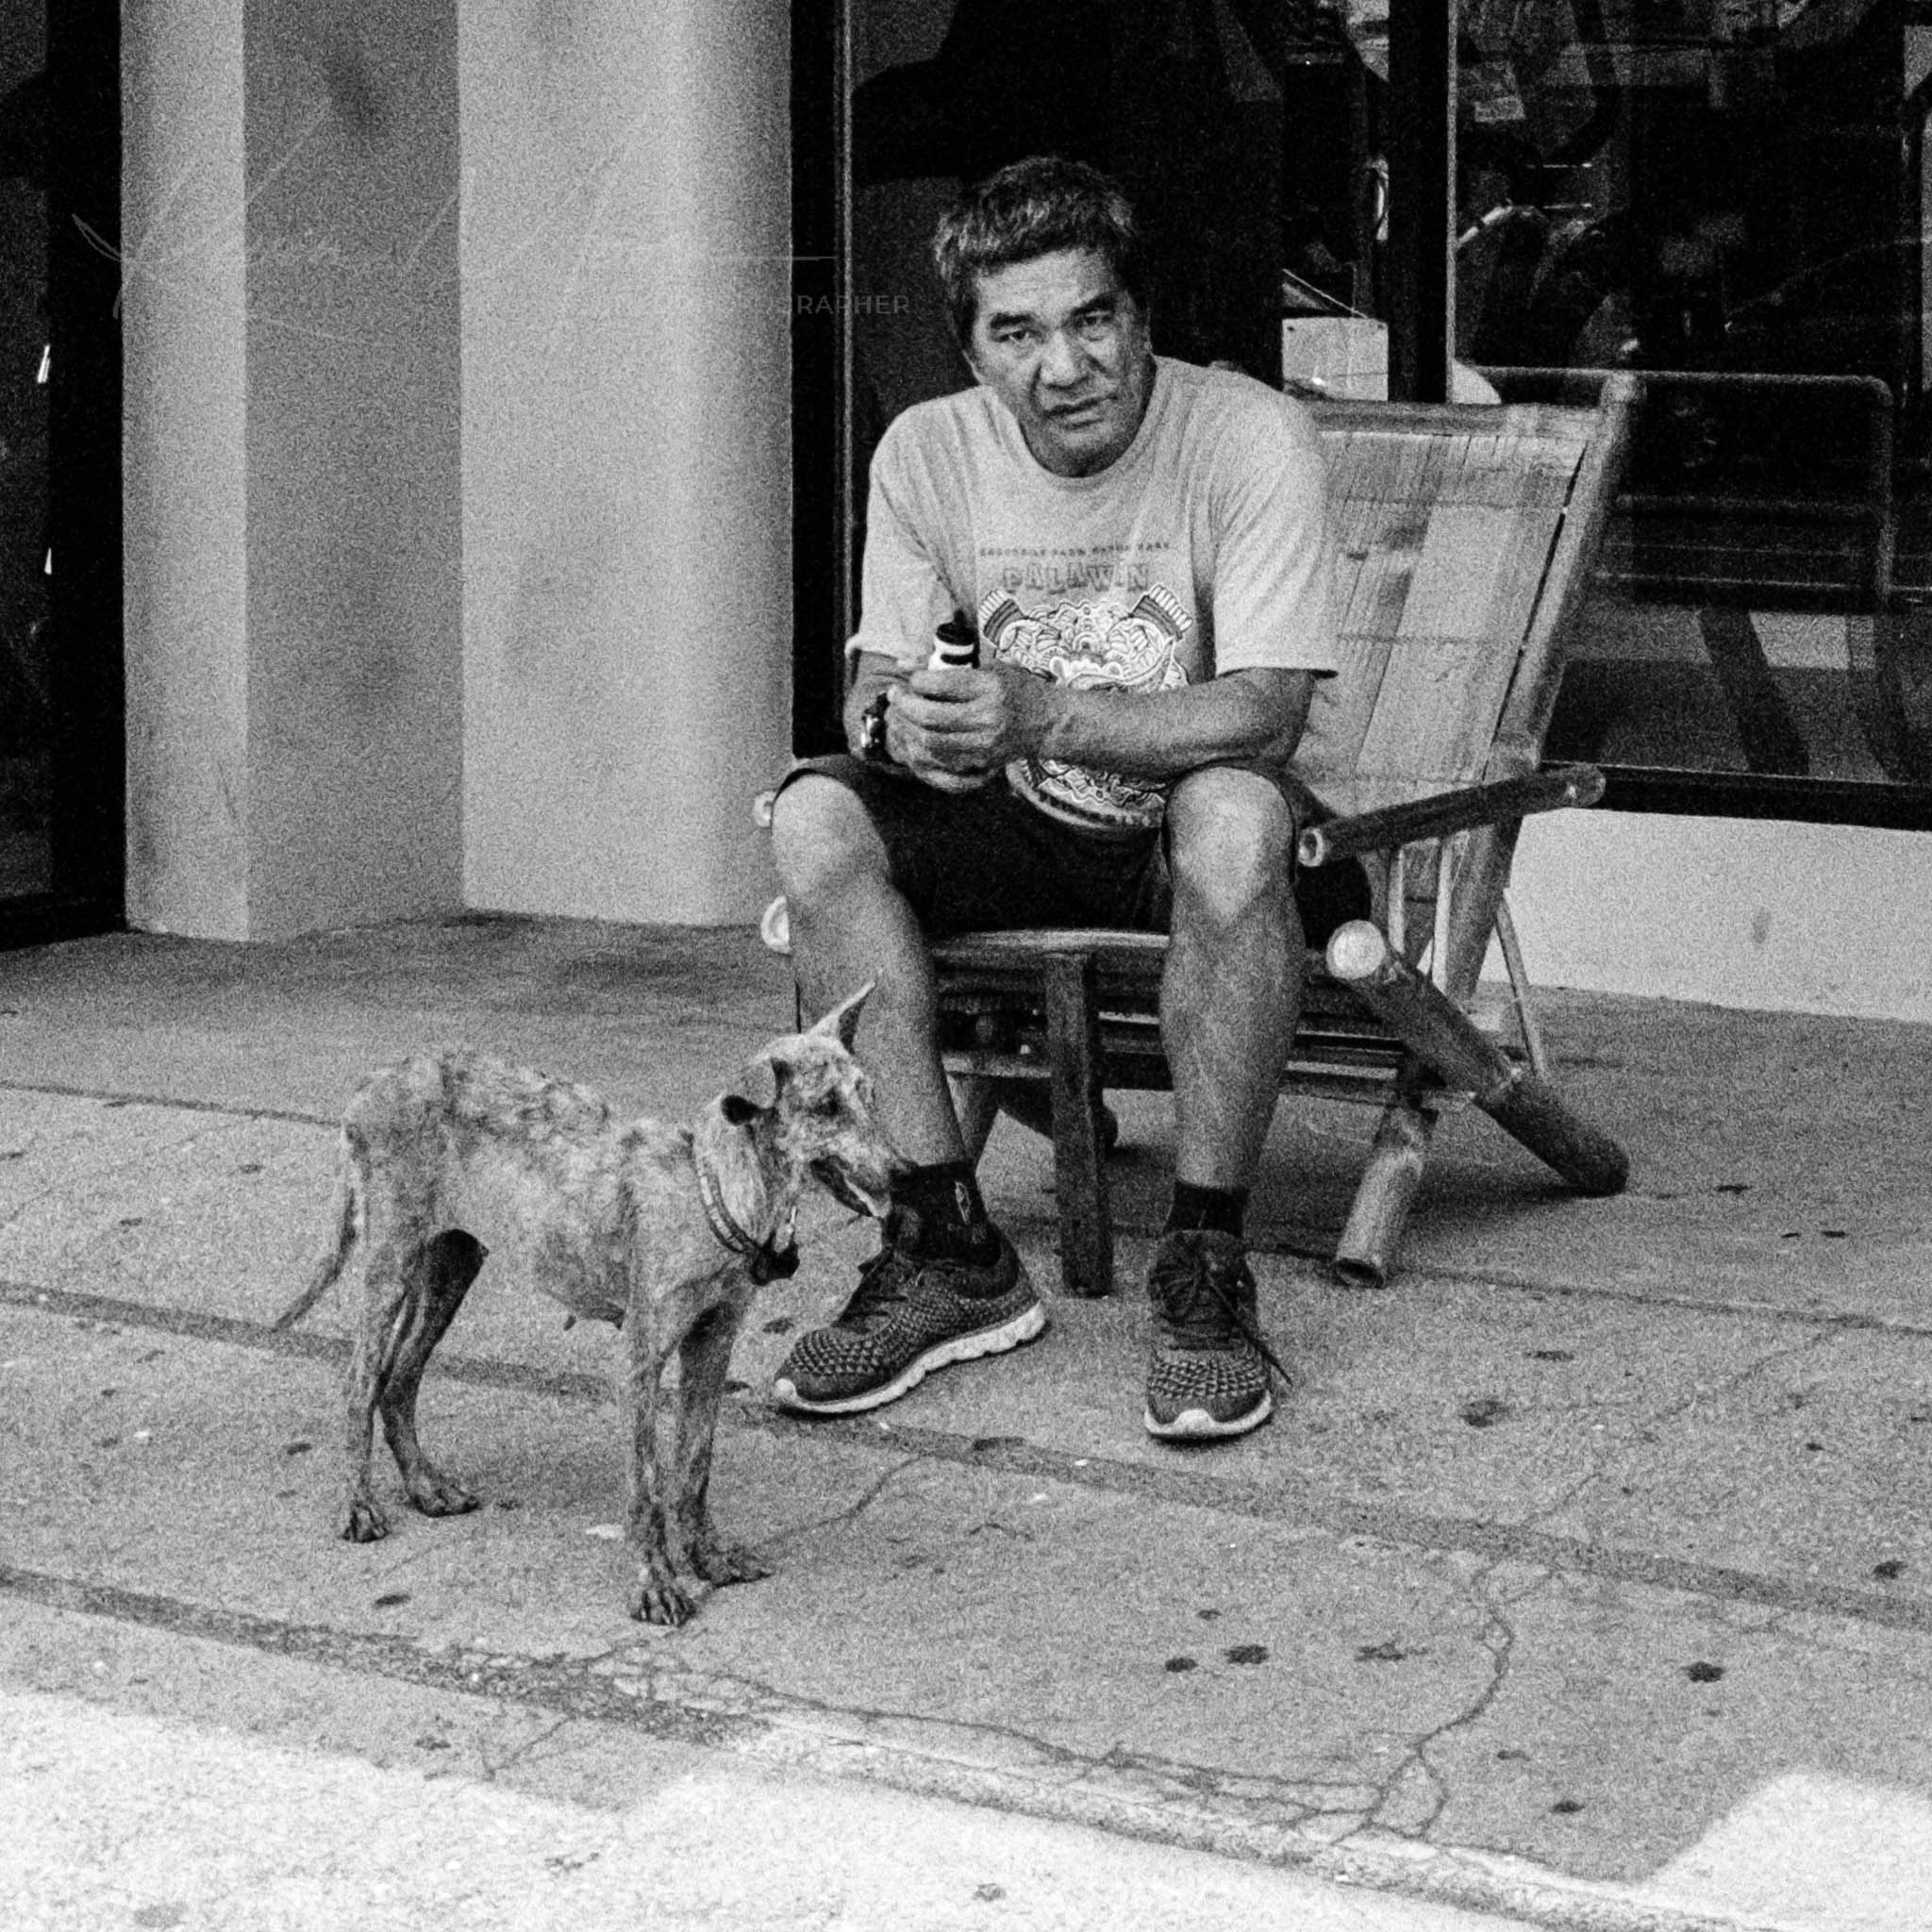 Man peacefully enjoying urban solitude with attentive terrier mix dog on city sidewalk in black and white.